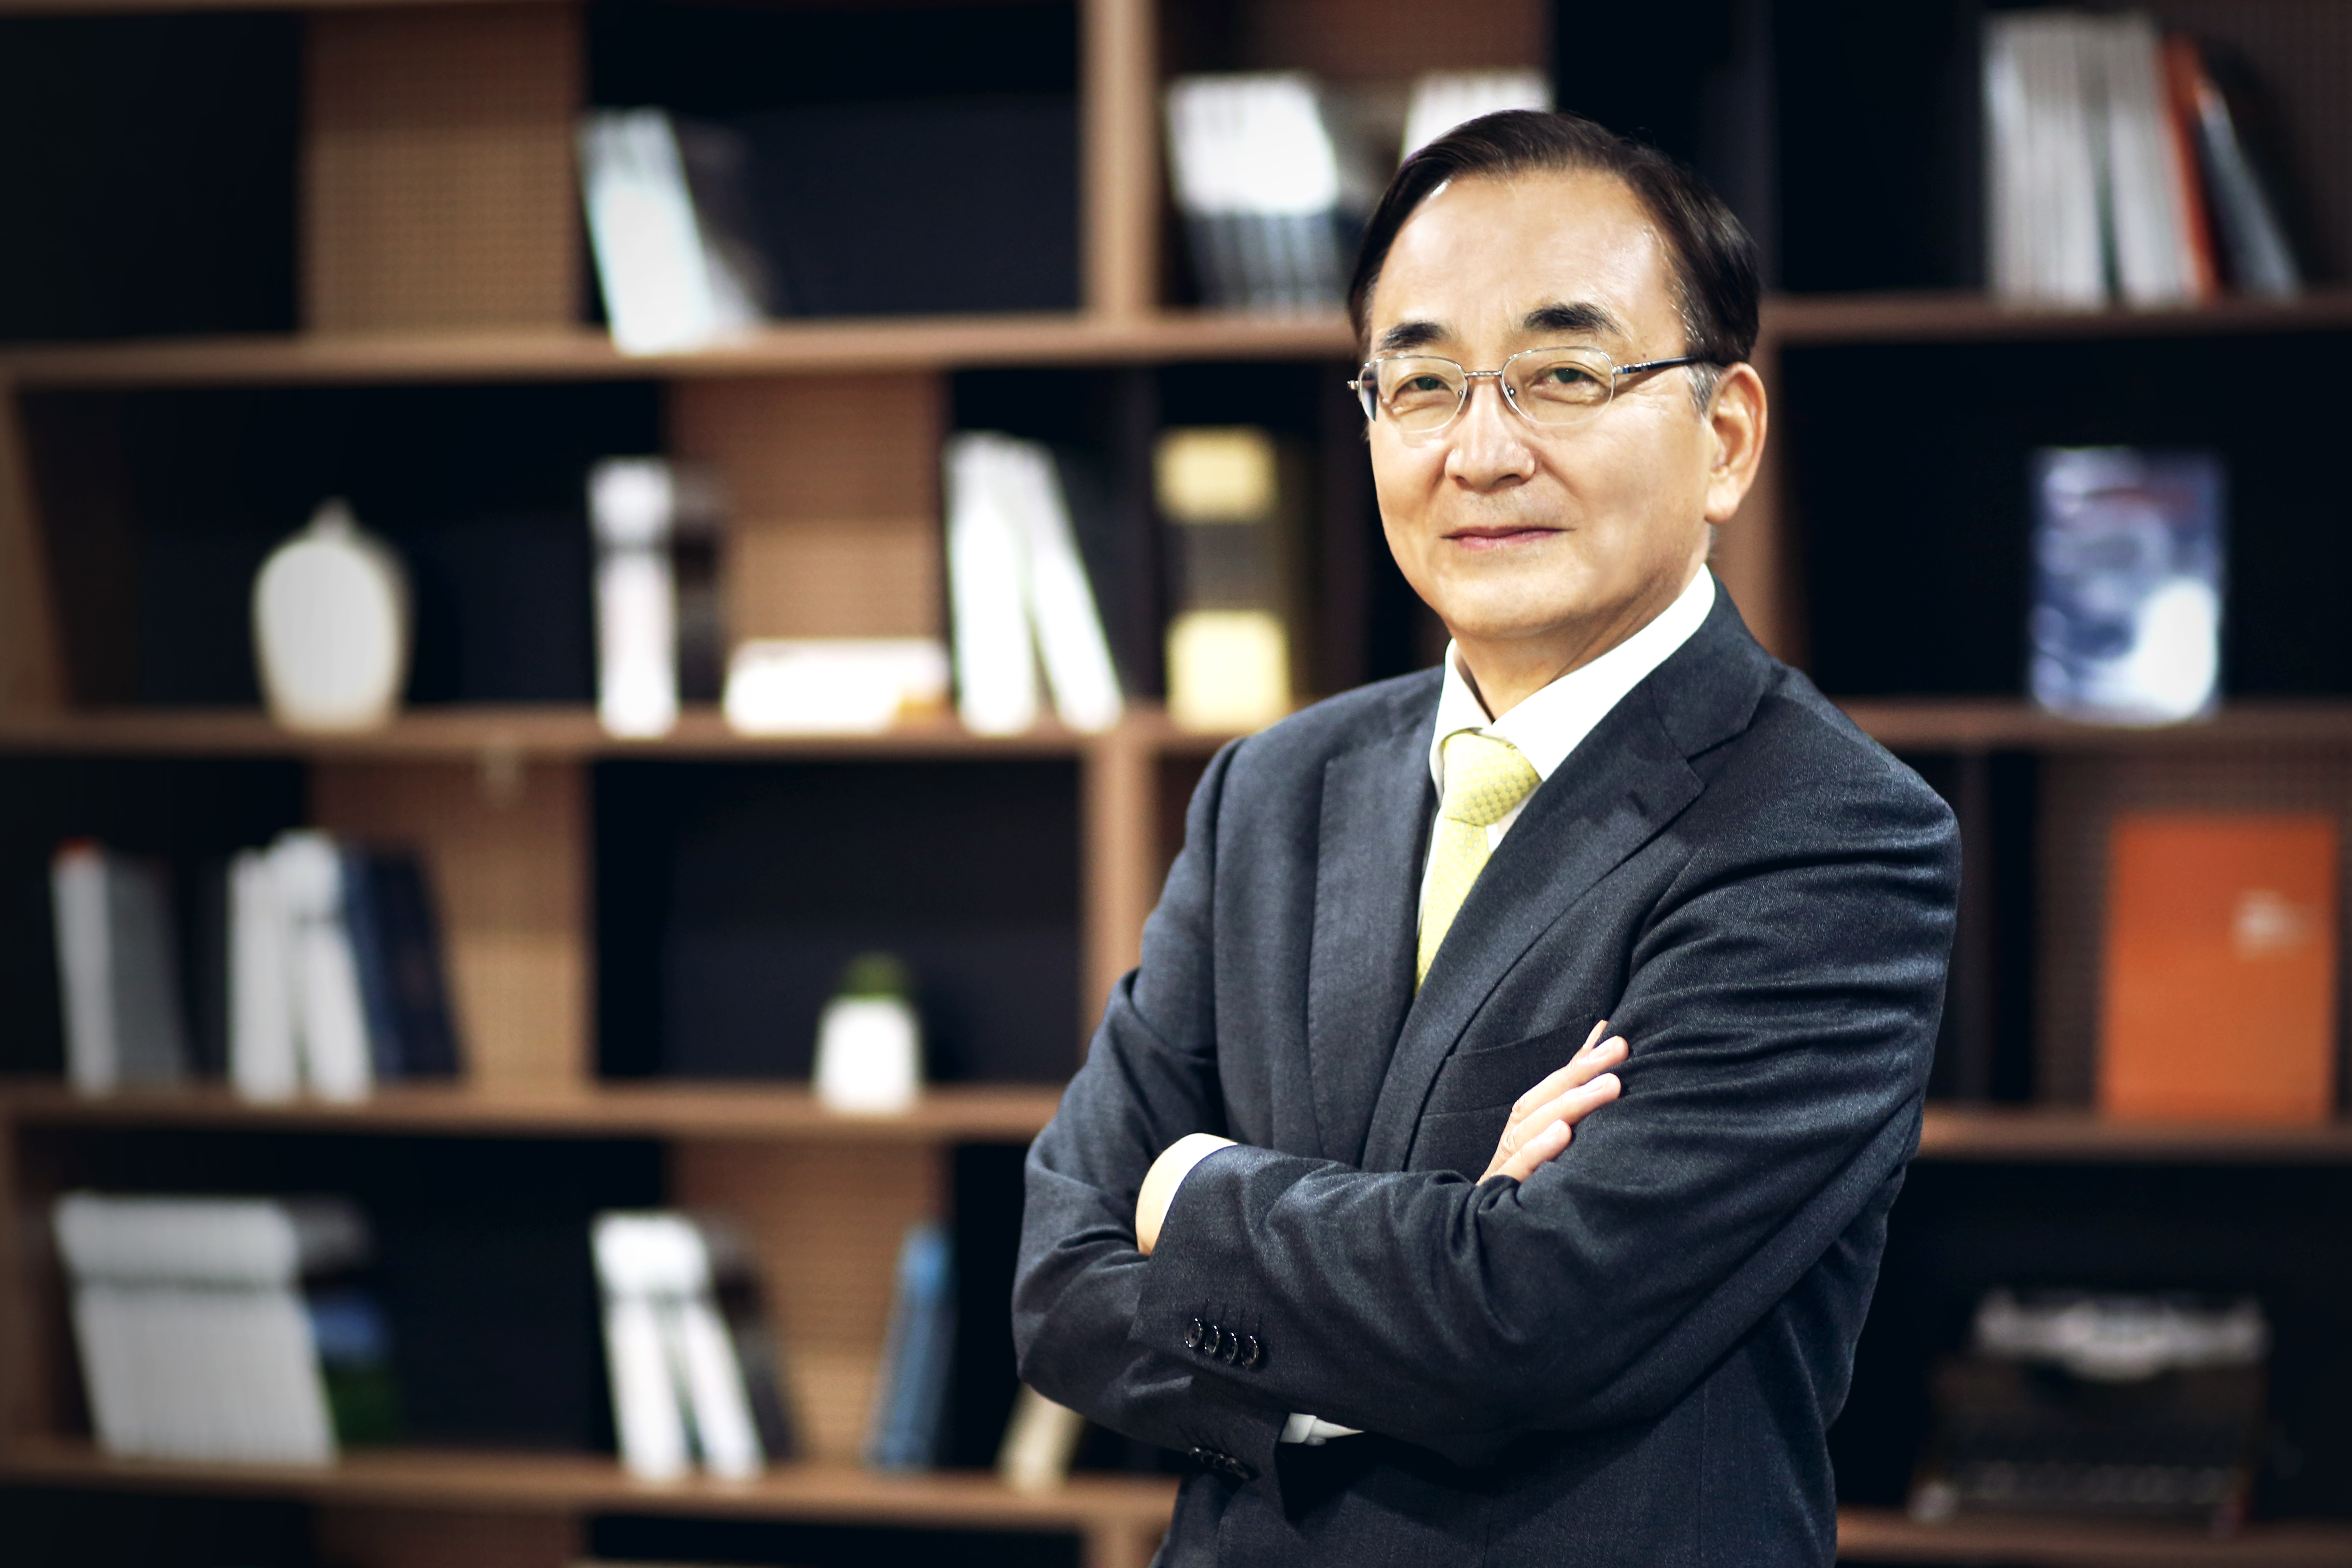 Message from the newly appointed President CHOI, Jeong Pyo